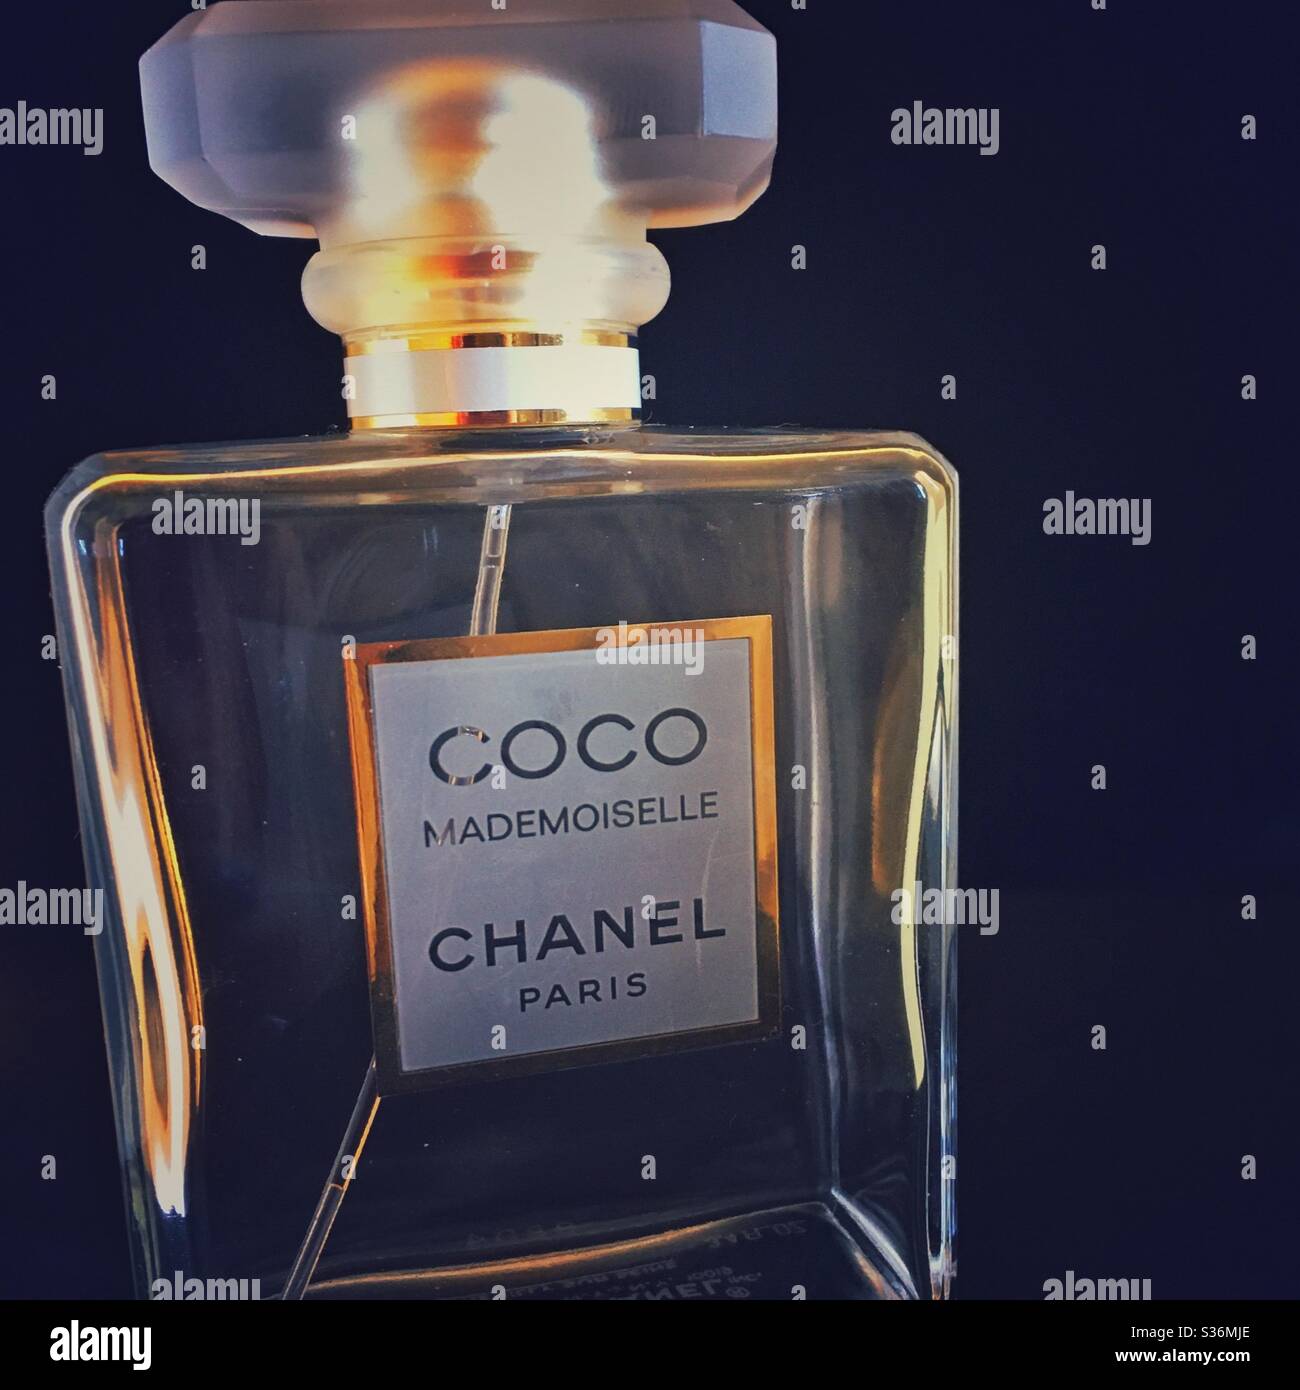 A photograph of a Chanel perfume bottle against a black background